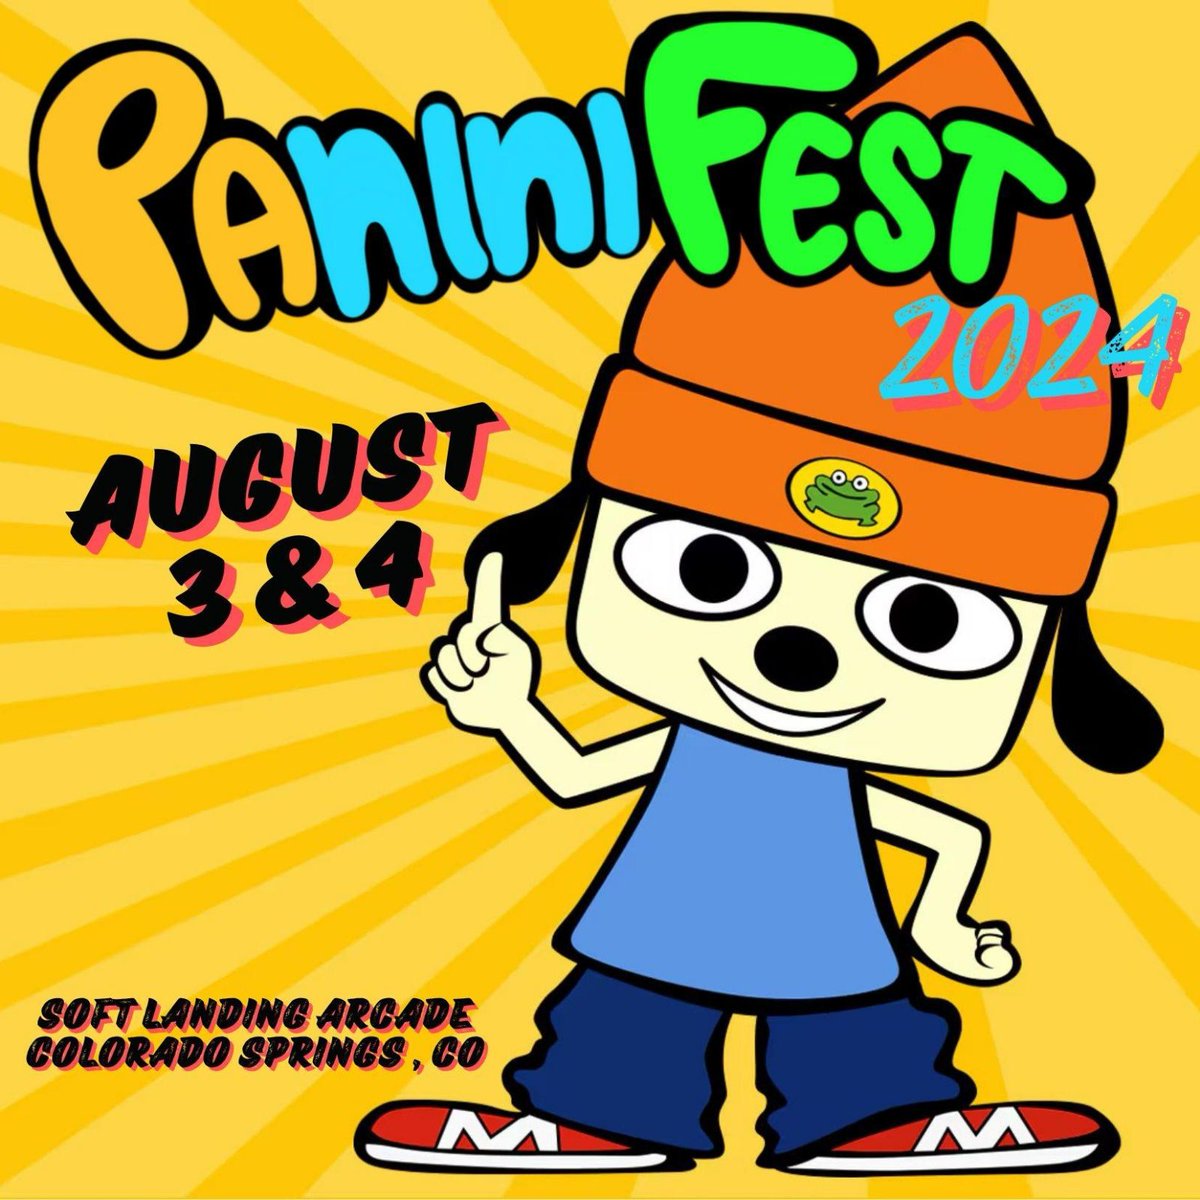 Panini Fest 2024 announced! August 3rd & 4th, in Colorado Springs, CO (~1.25 hours south of Denver)! ITG, DDR, PIU tournaments plus full arcade thanks to Soft Landing. Event sponsors, cost, registration coming soon. Mark yr calendars.